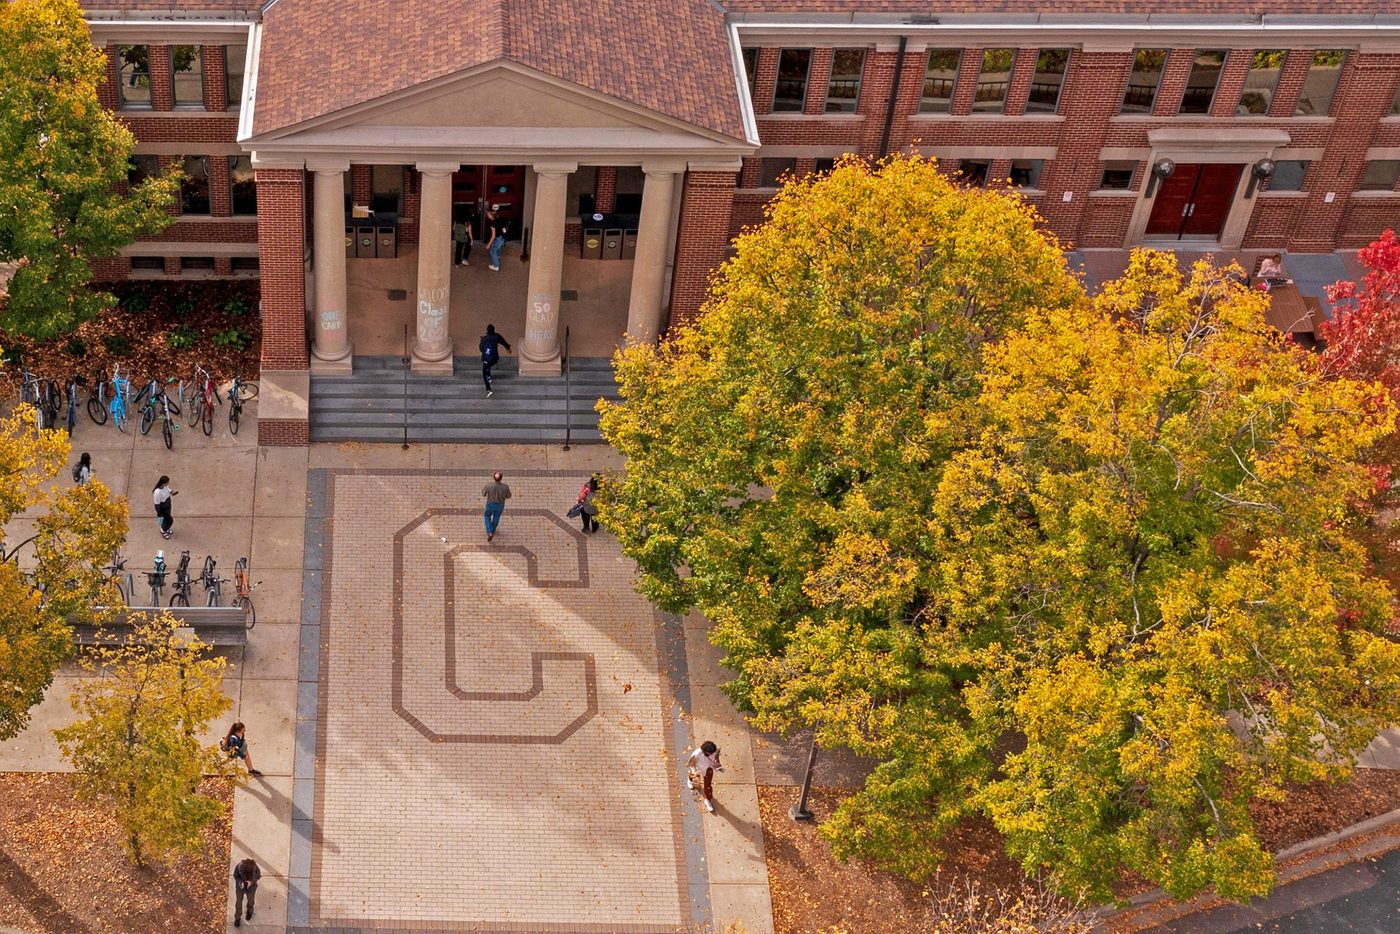 Overhead view of the entrance to the Sayles-Hill student center